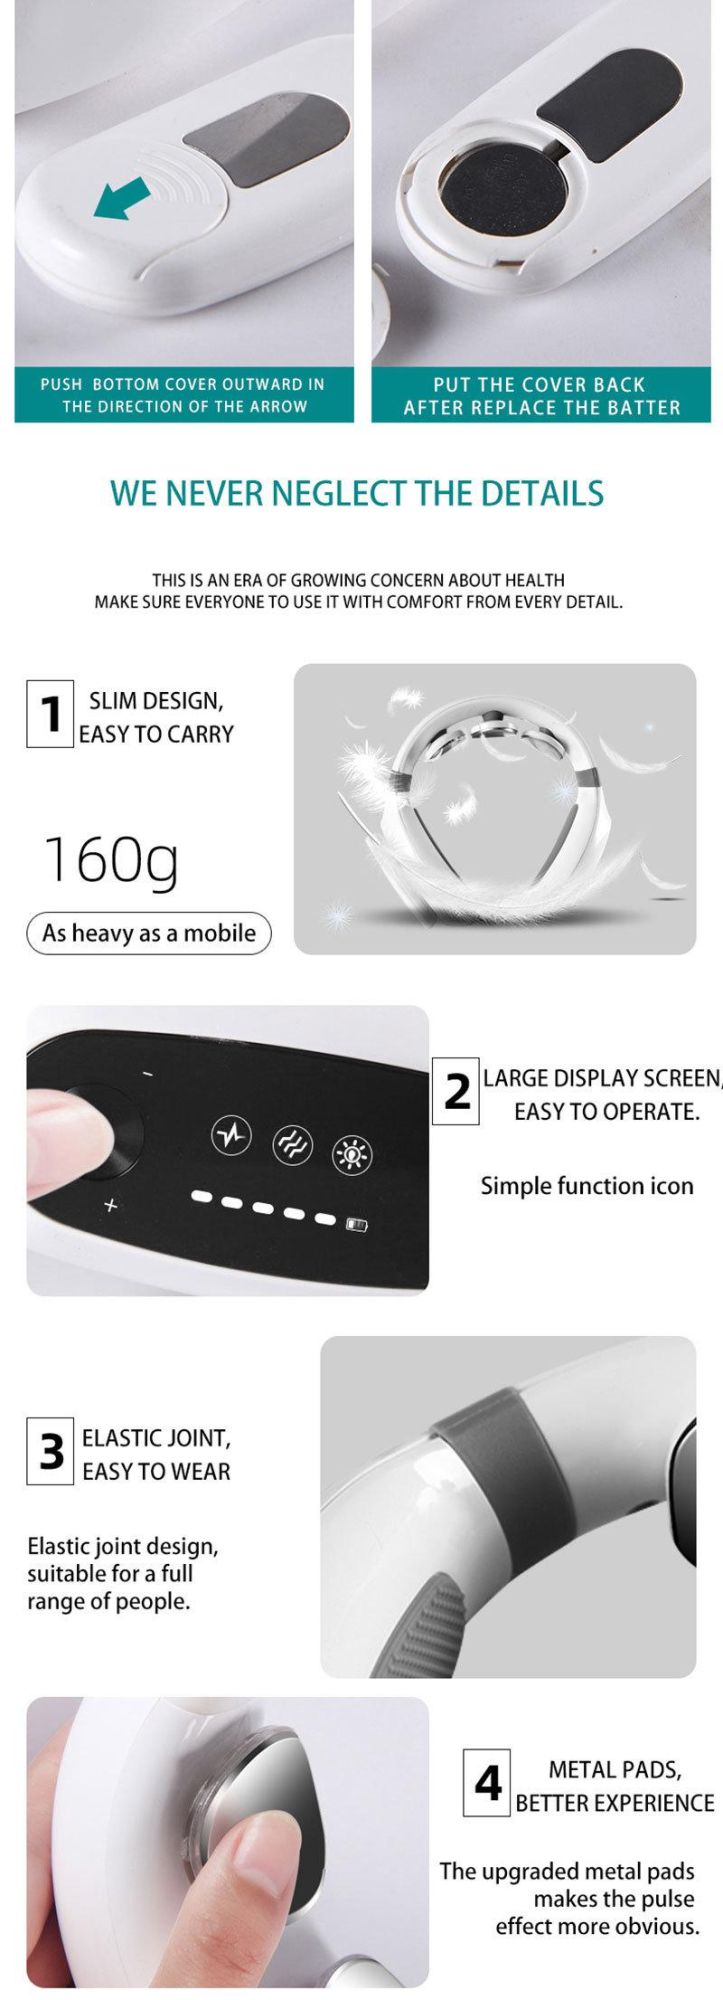 Hezheng Amazon Top Selling Portable Mini 360 Infrared Physiotherapy Electric Wireless Smart Neck Massager